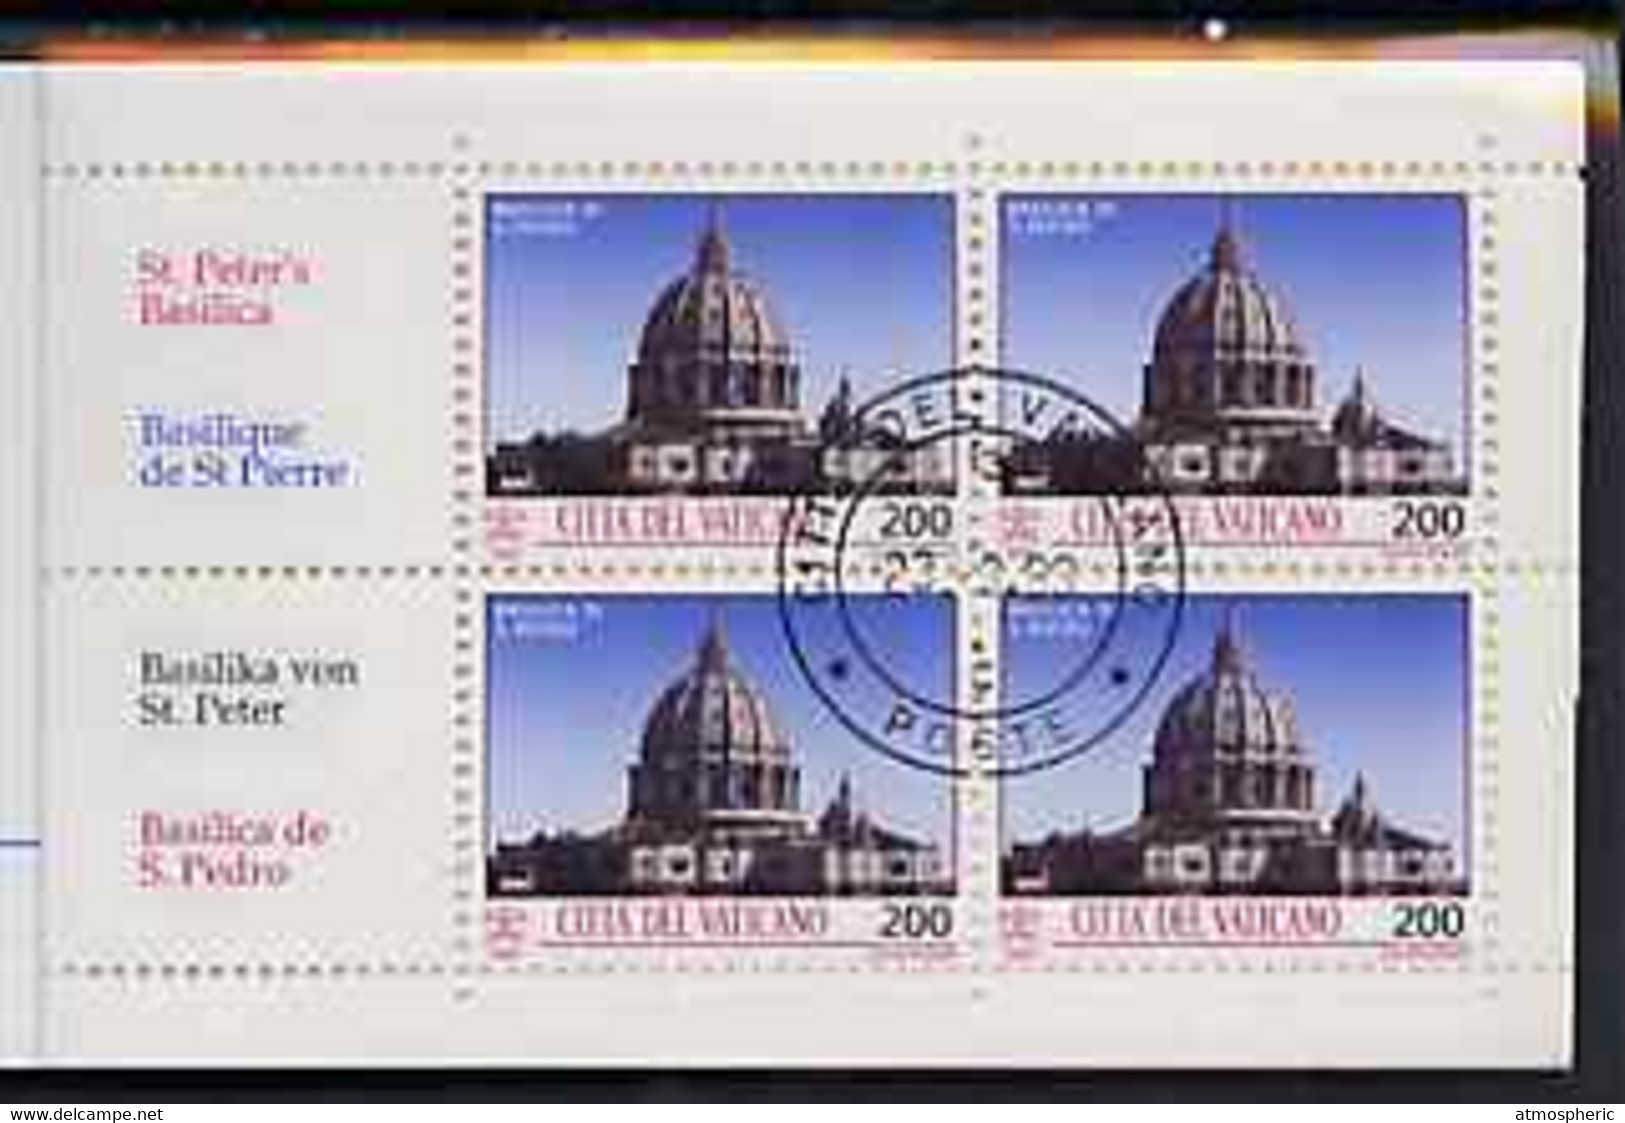 Booklet - Vatican City 1993 Architectural Treasures 5400L Booklet Complete With First Day Cancels, SG SB4 - Carnets